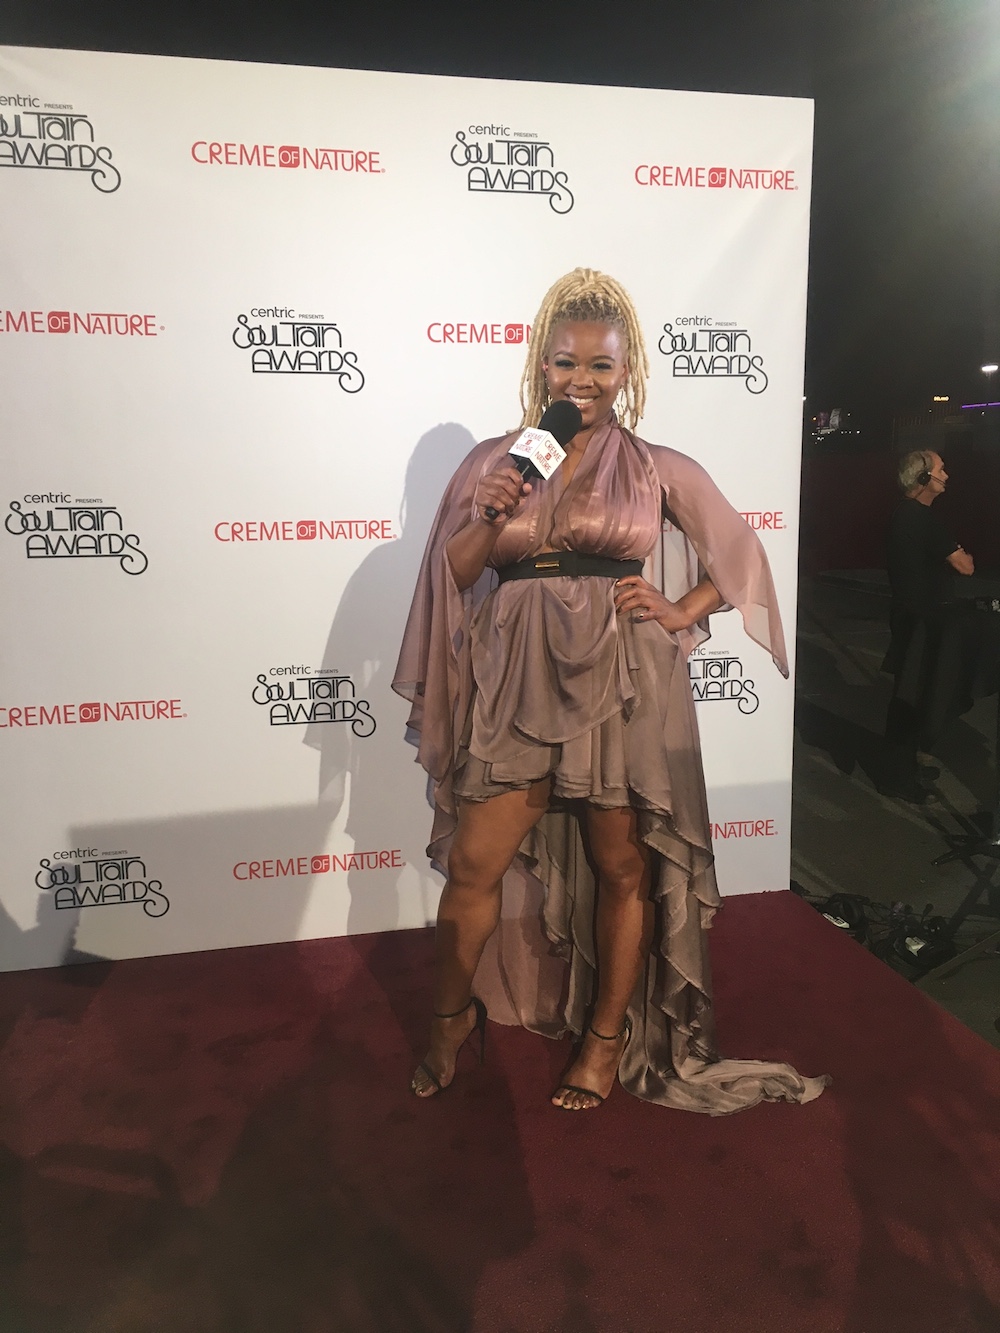 elise-neal-claires-life-sulmers-fashion-bomb-daily-hosting-the-style-stage-at-the-2016-soul-train-awards-with-cream-of-nature-wearing-tina-summers